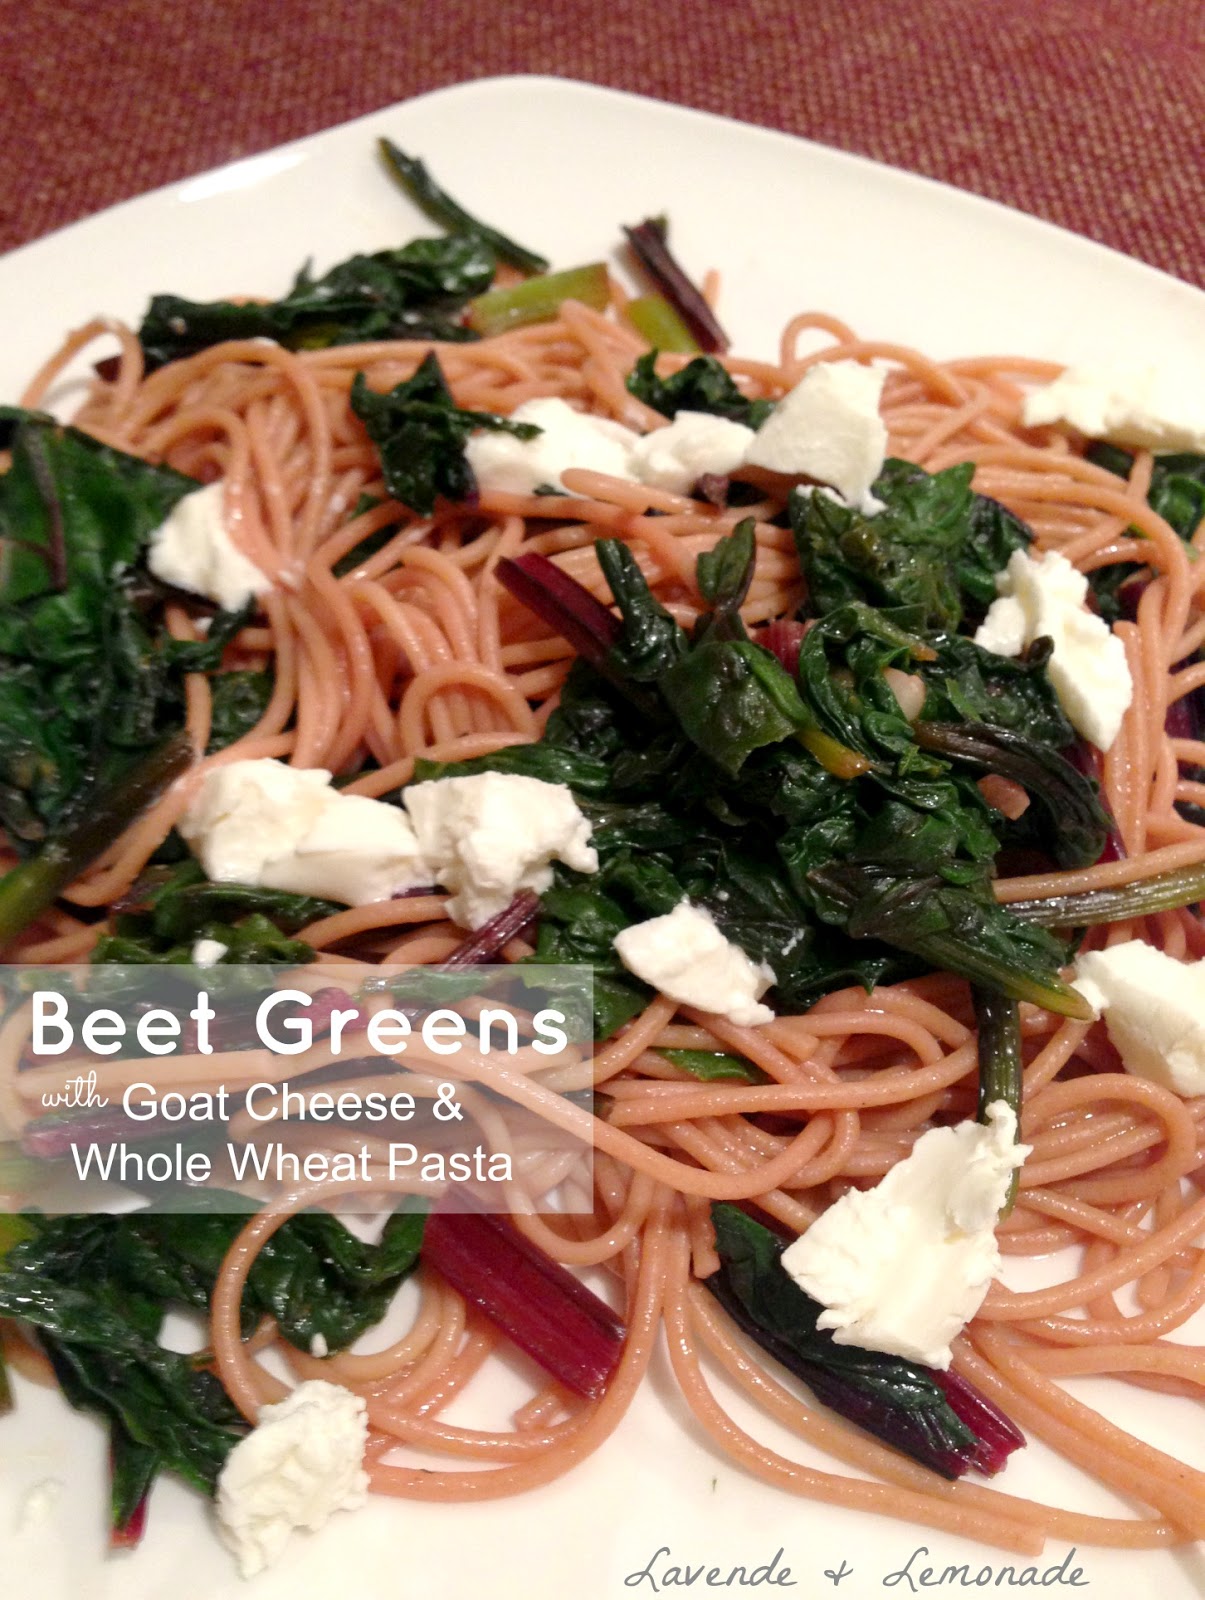 Beet greens with goat cheese and whole wheat pasta